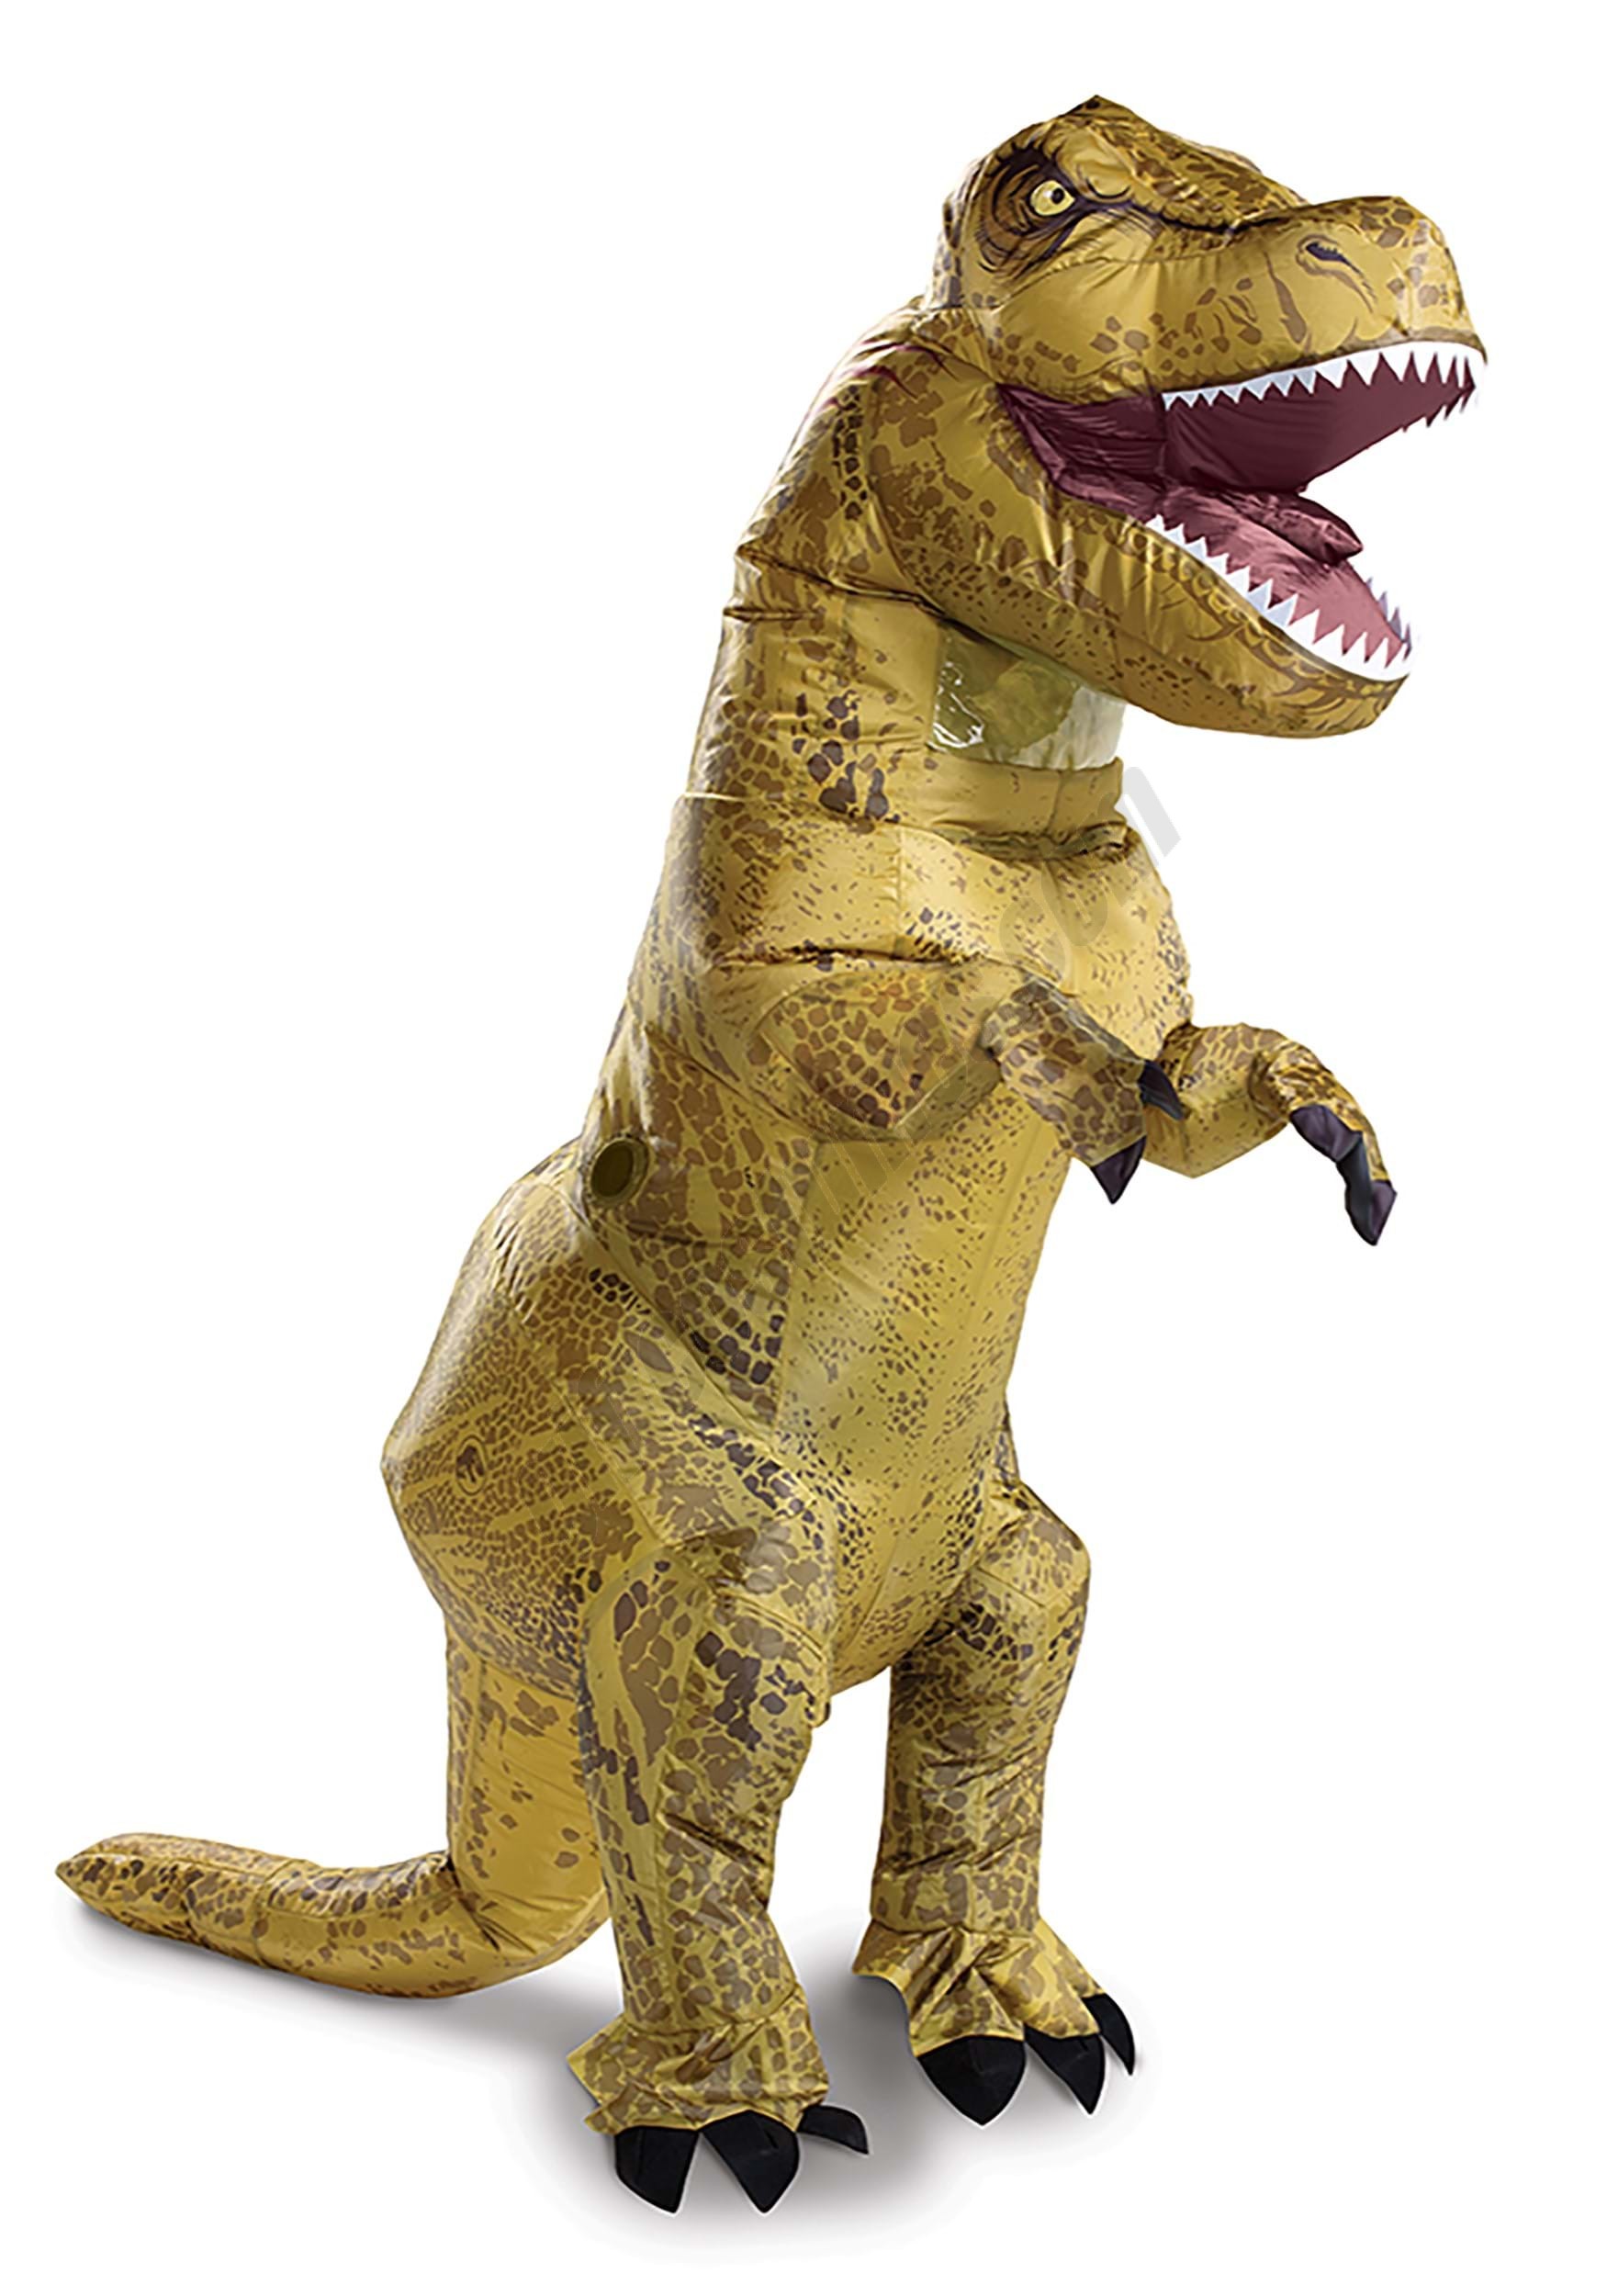 Jurassic World Inflatable T-Rex Costume for Adults - Men's - Jurassic World Inflatable T-Rex Costume for Adults - Men's